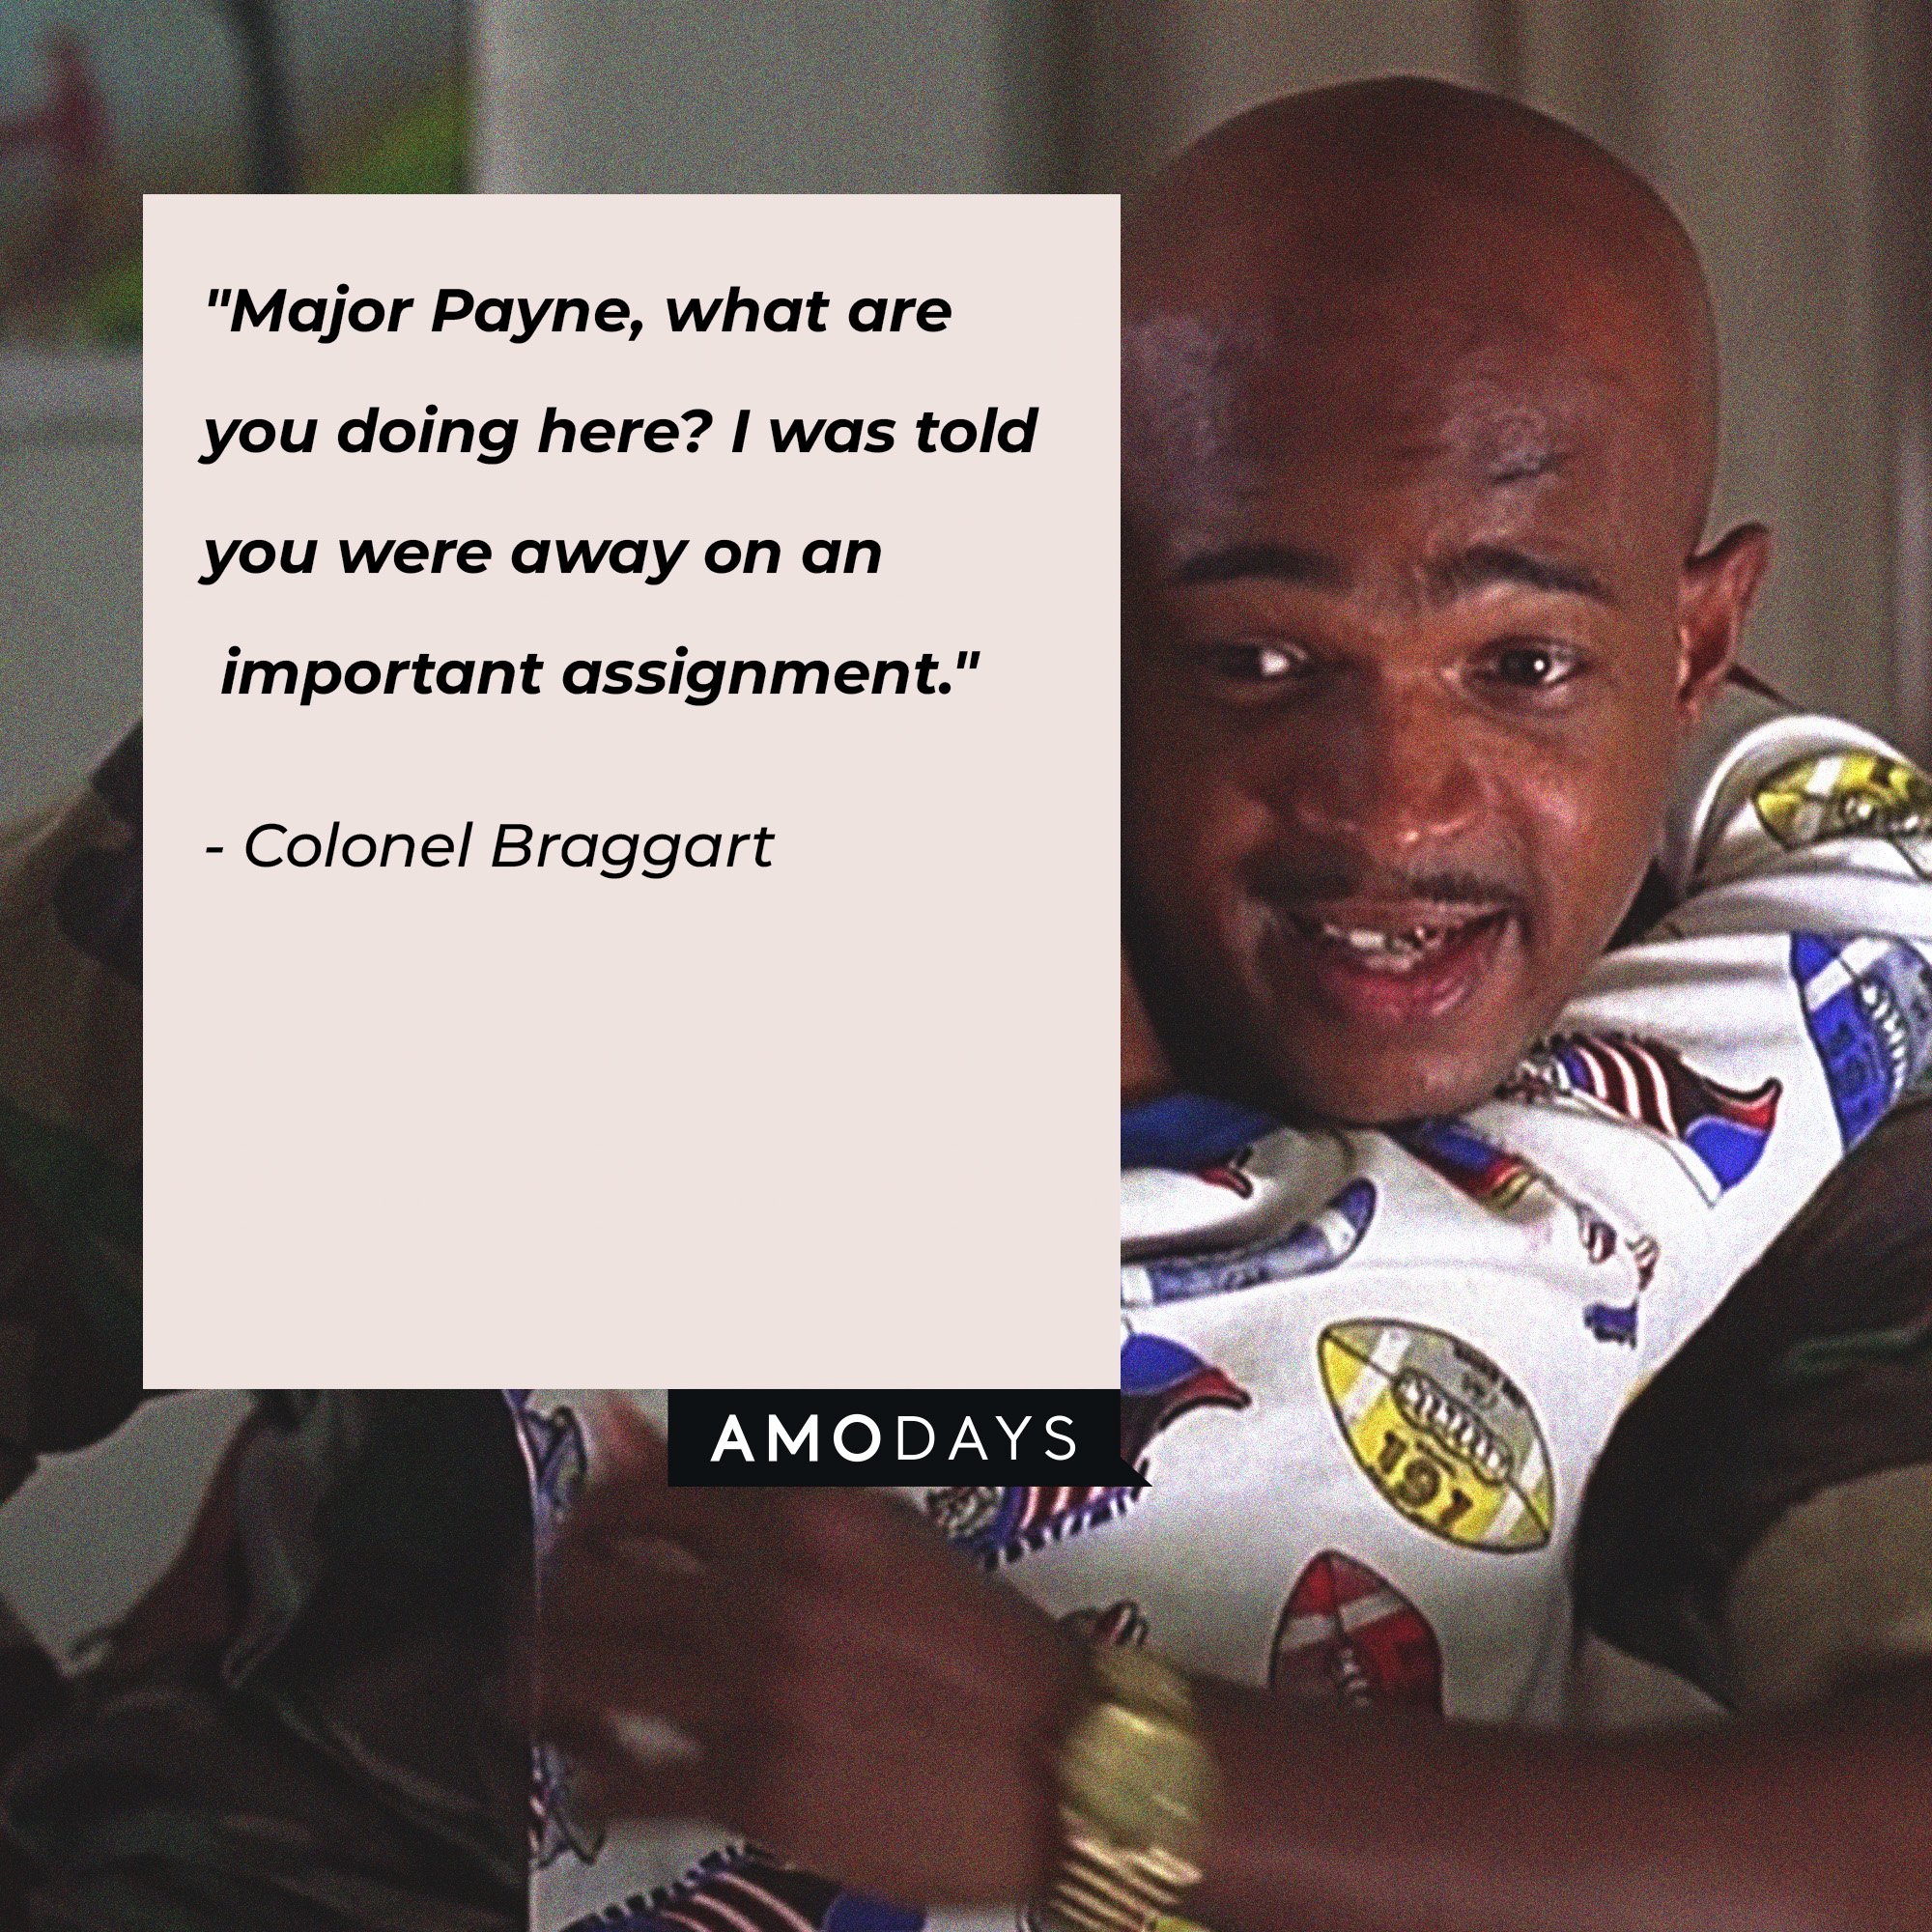 Major Payne's quote: "Major Payne, what are you doing here? I was told you were away on an important assignment." | Source: Amodays